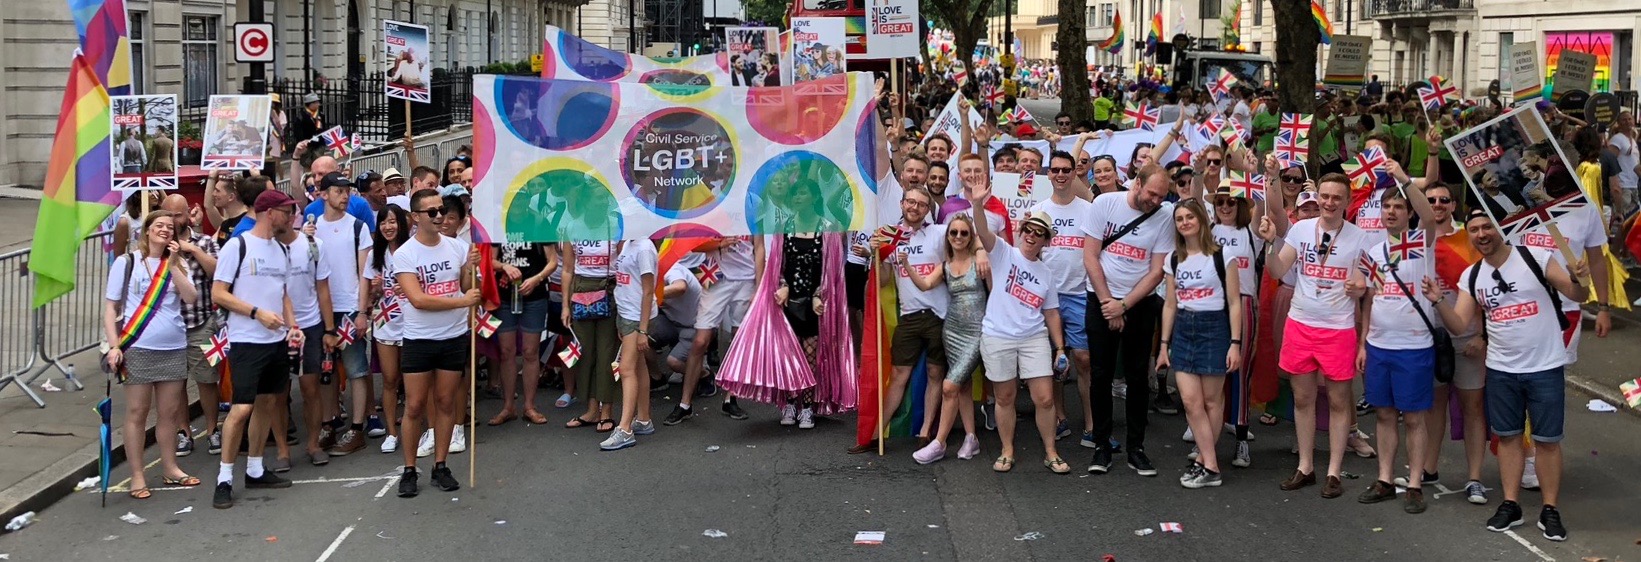 Our parade group at Pride in London